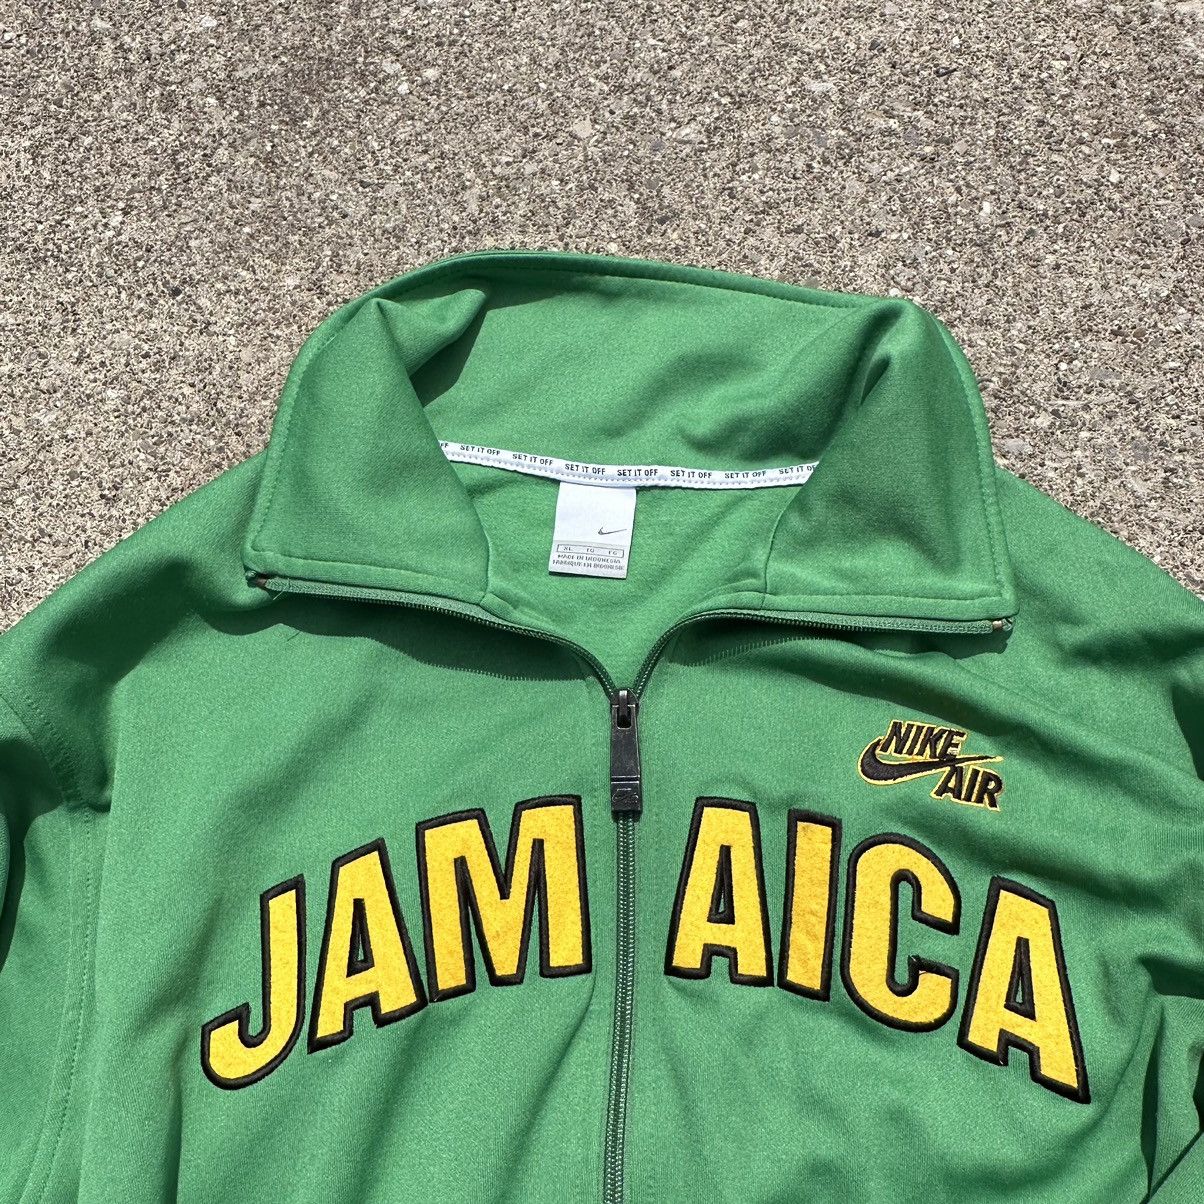 Nike Vintage Nike Air Jamaica zip up Size US XL / EU 56 / 4 - 6 Preview